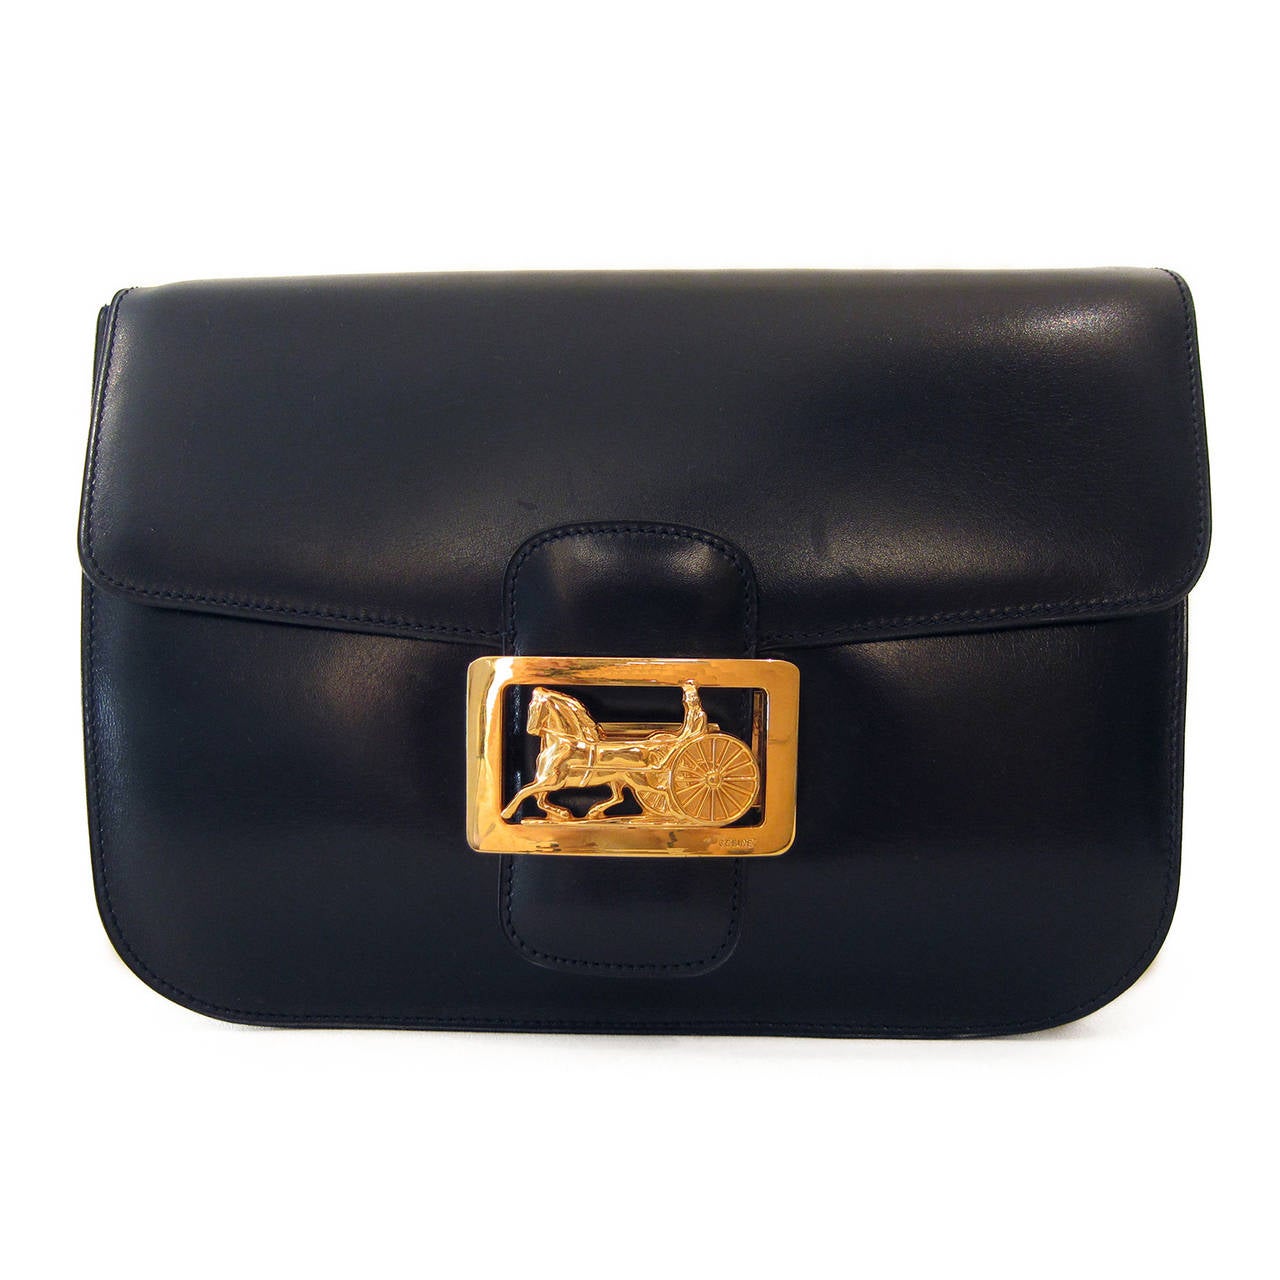 Céline Diffusion vintage shoulder box bag in very dark navy (closer to black) leather. It has a beautifully crafted classic golden horse carriage closure. 
Inside - divided in three compartments - the back compartment features a zipper side pocket